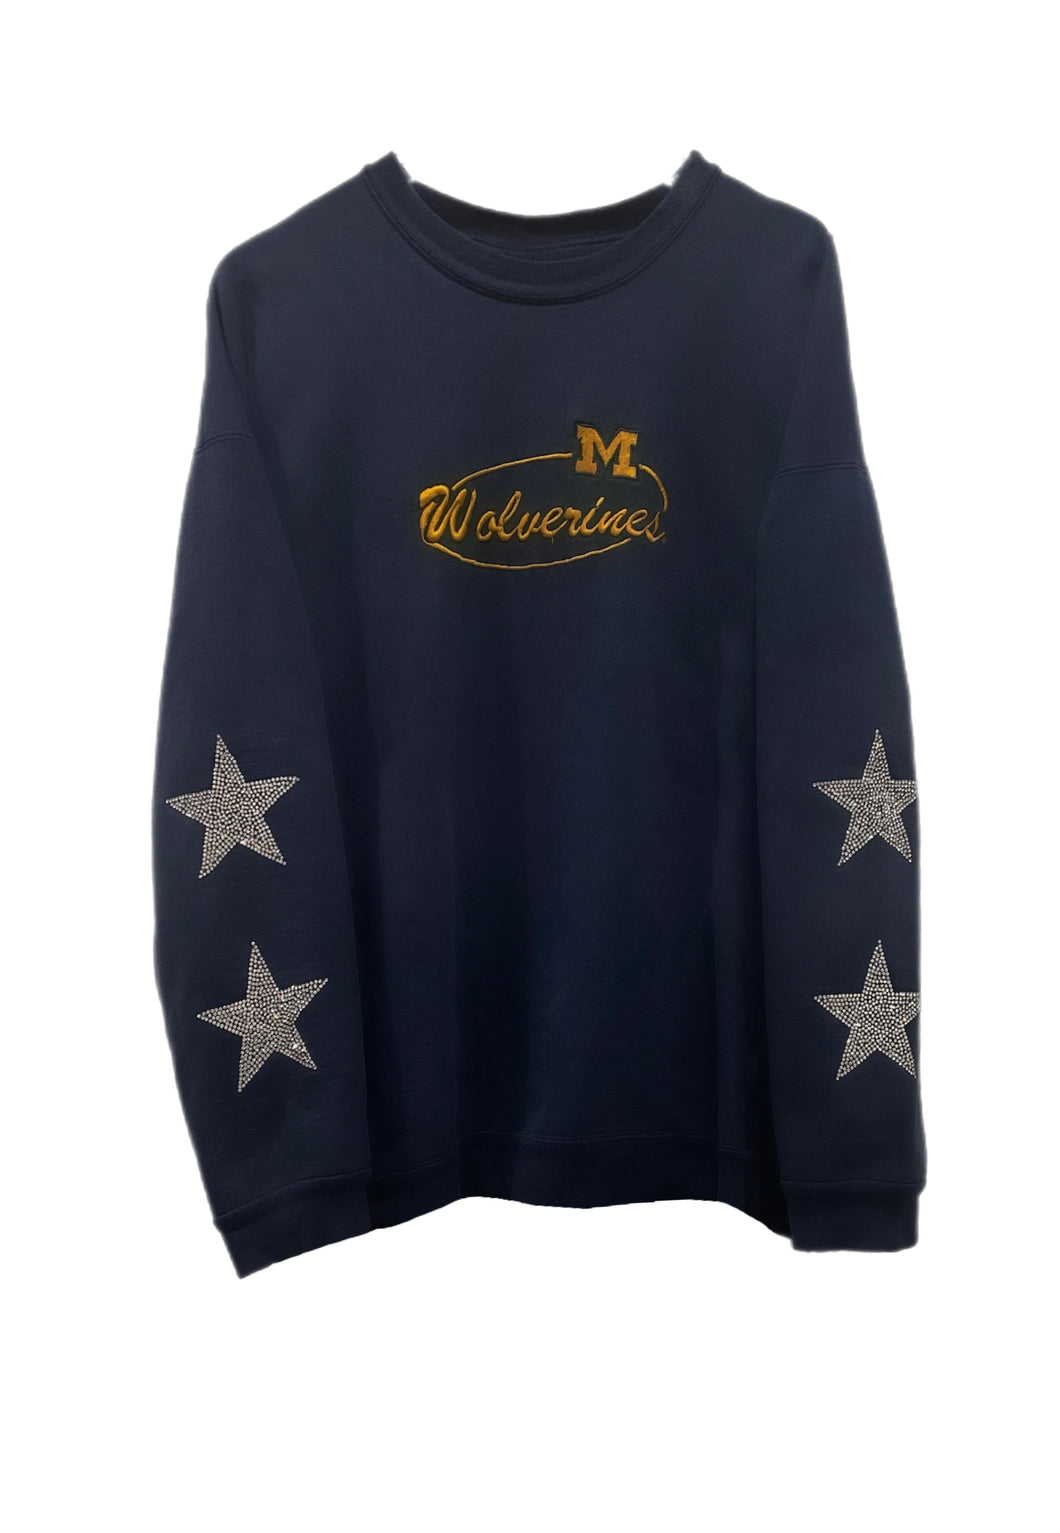 University of Michigan, One of a KIND Vintage UMich Sweatshirt with Crystal Star Design